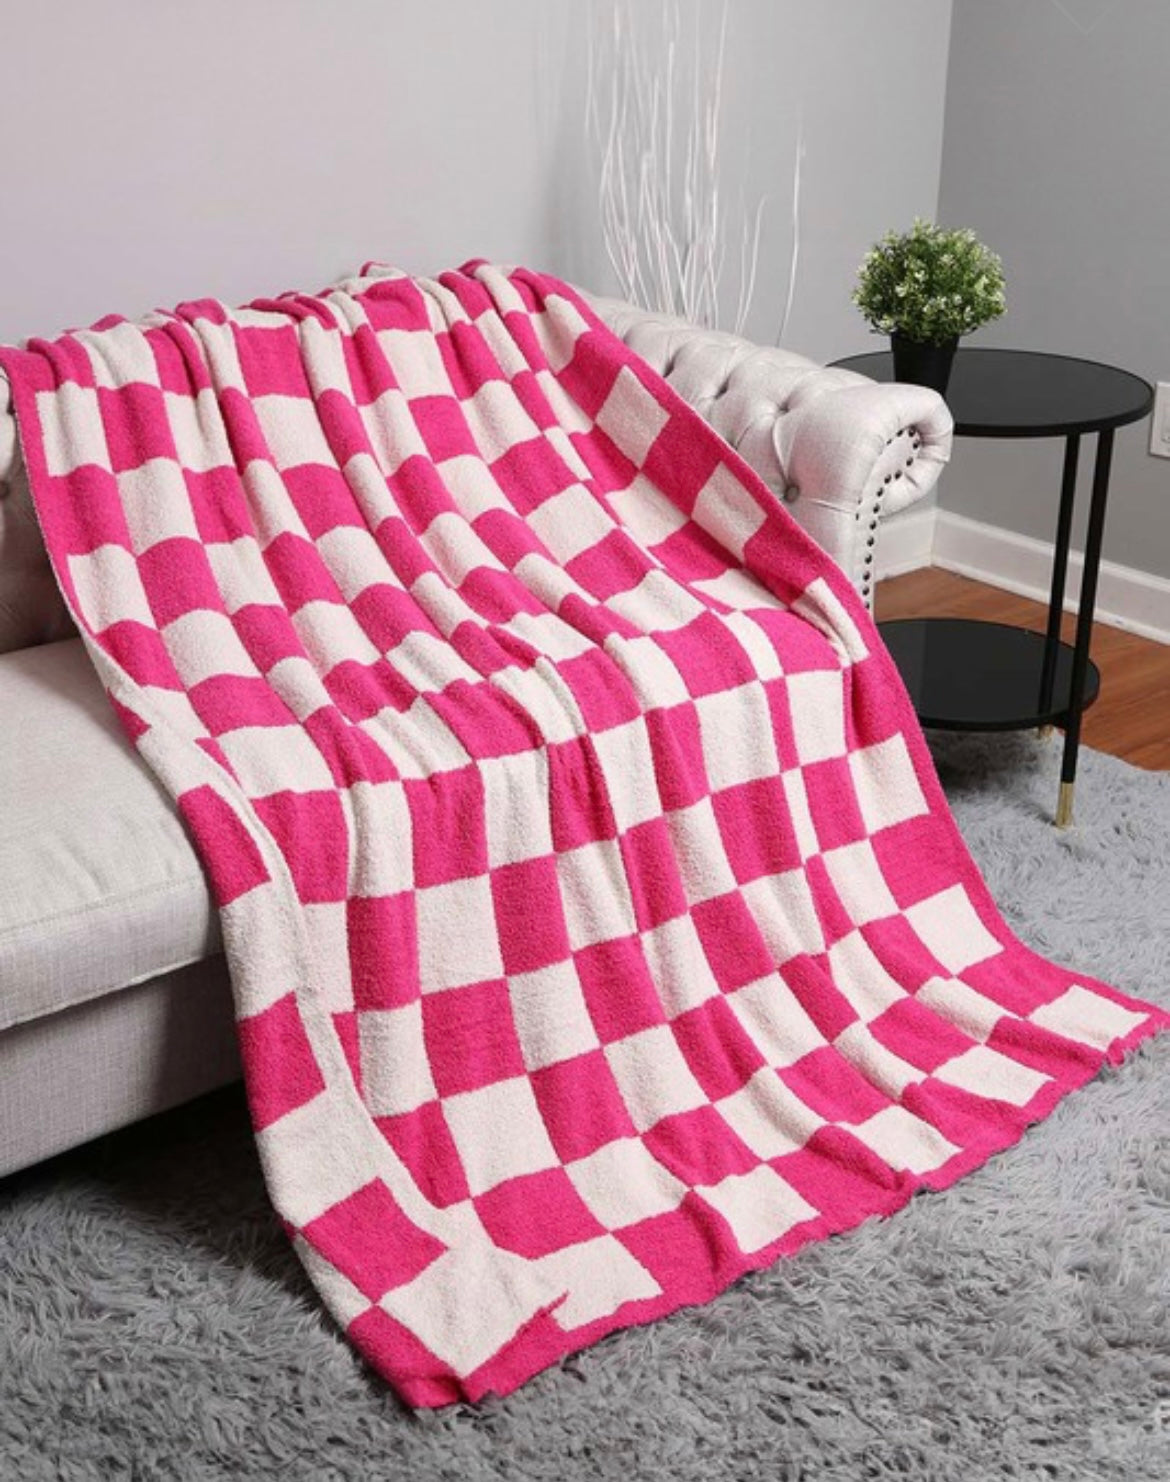 Checked blanket